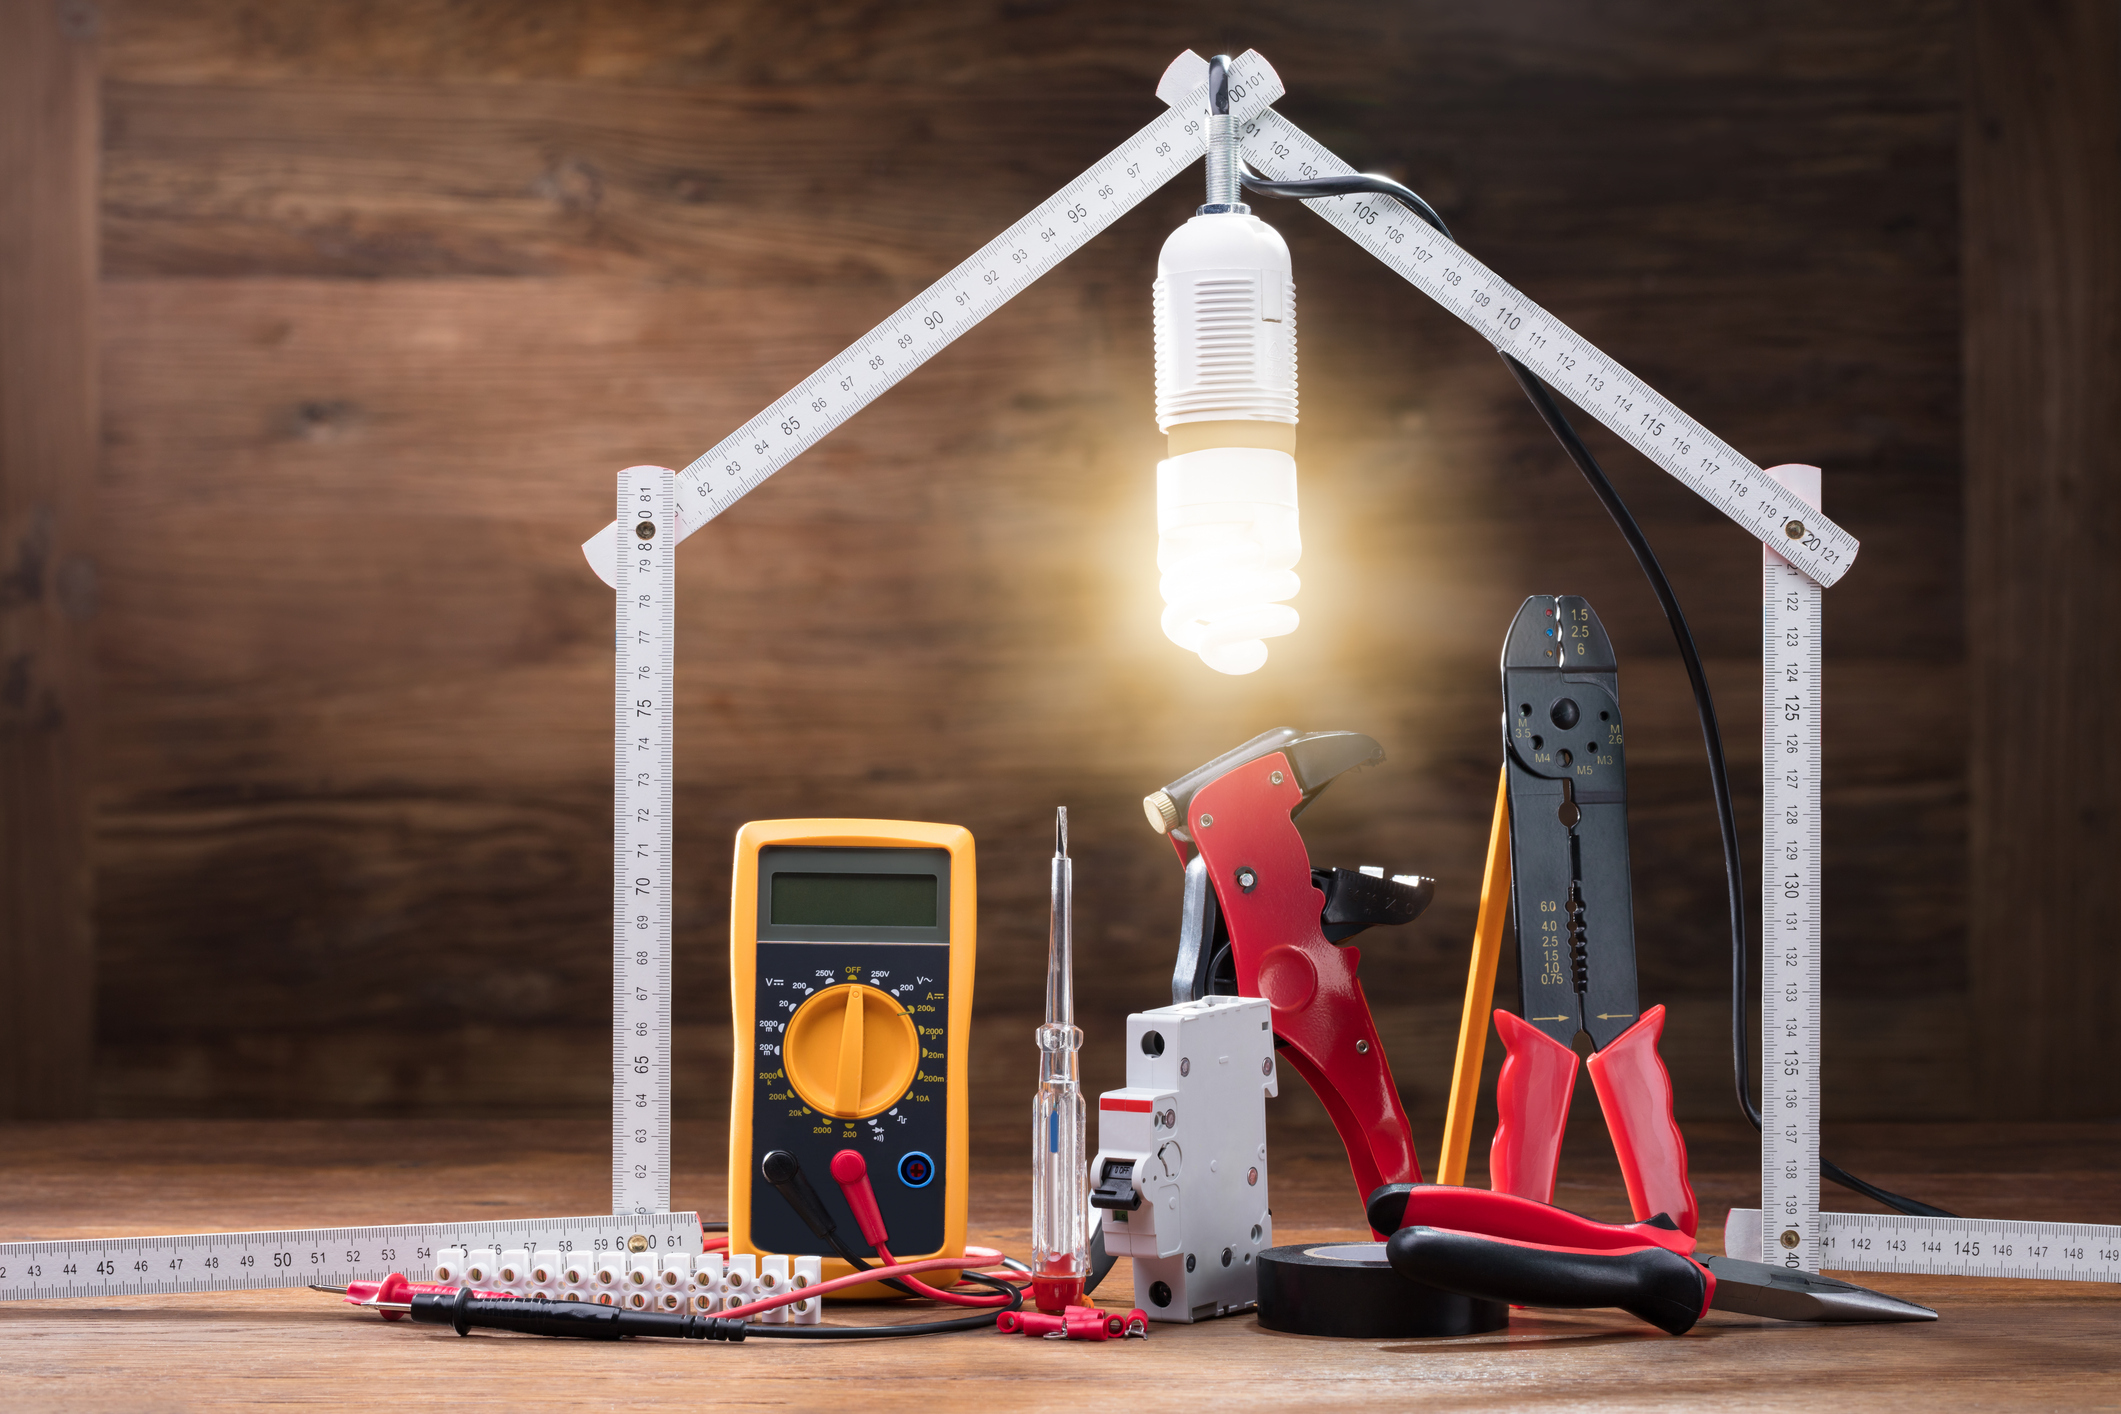 Discover how electricians can help with energy efficiency in your home. Learn about lighting upgrades, smart device installations, electrical panel upgrades, and more. Contact us for professional electrician services in Prescott, ON.